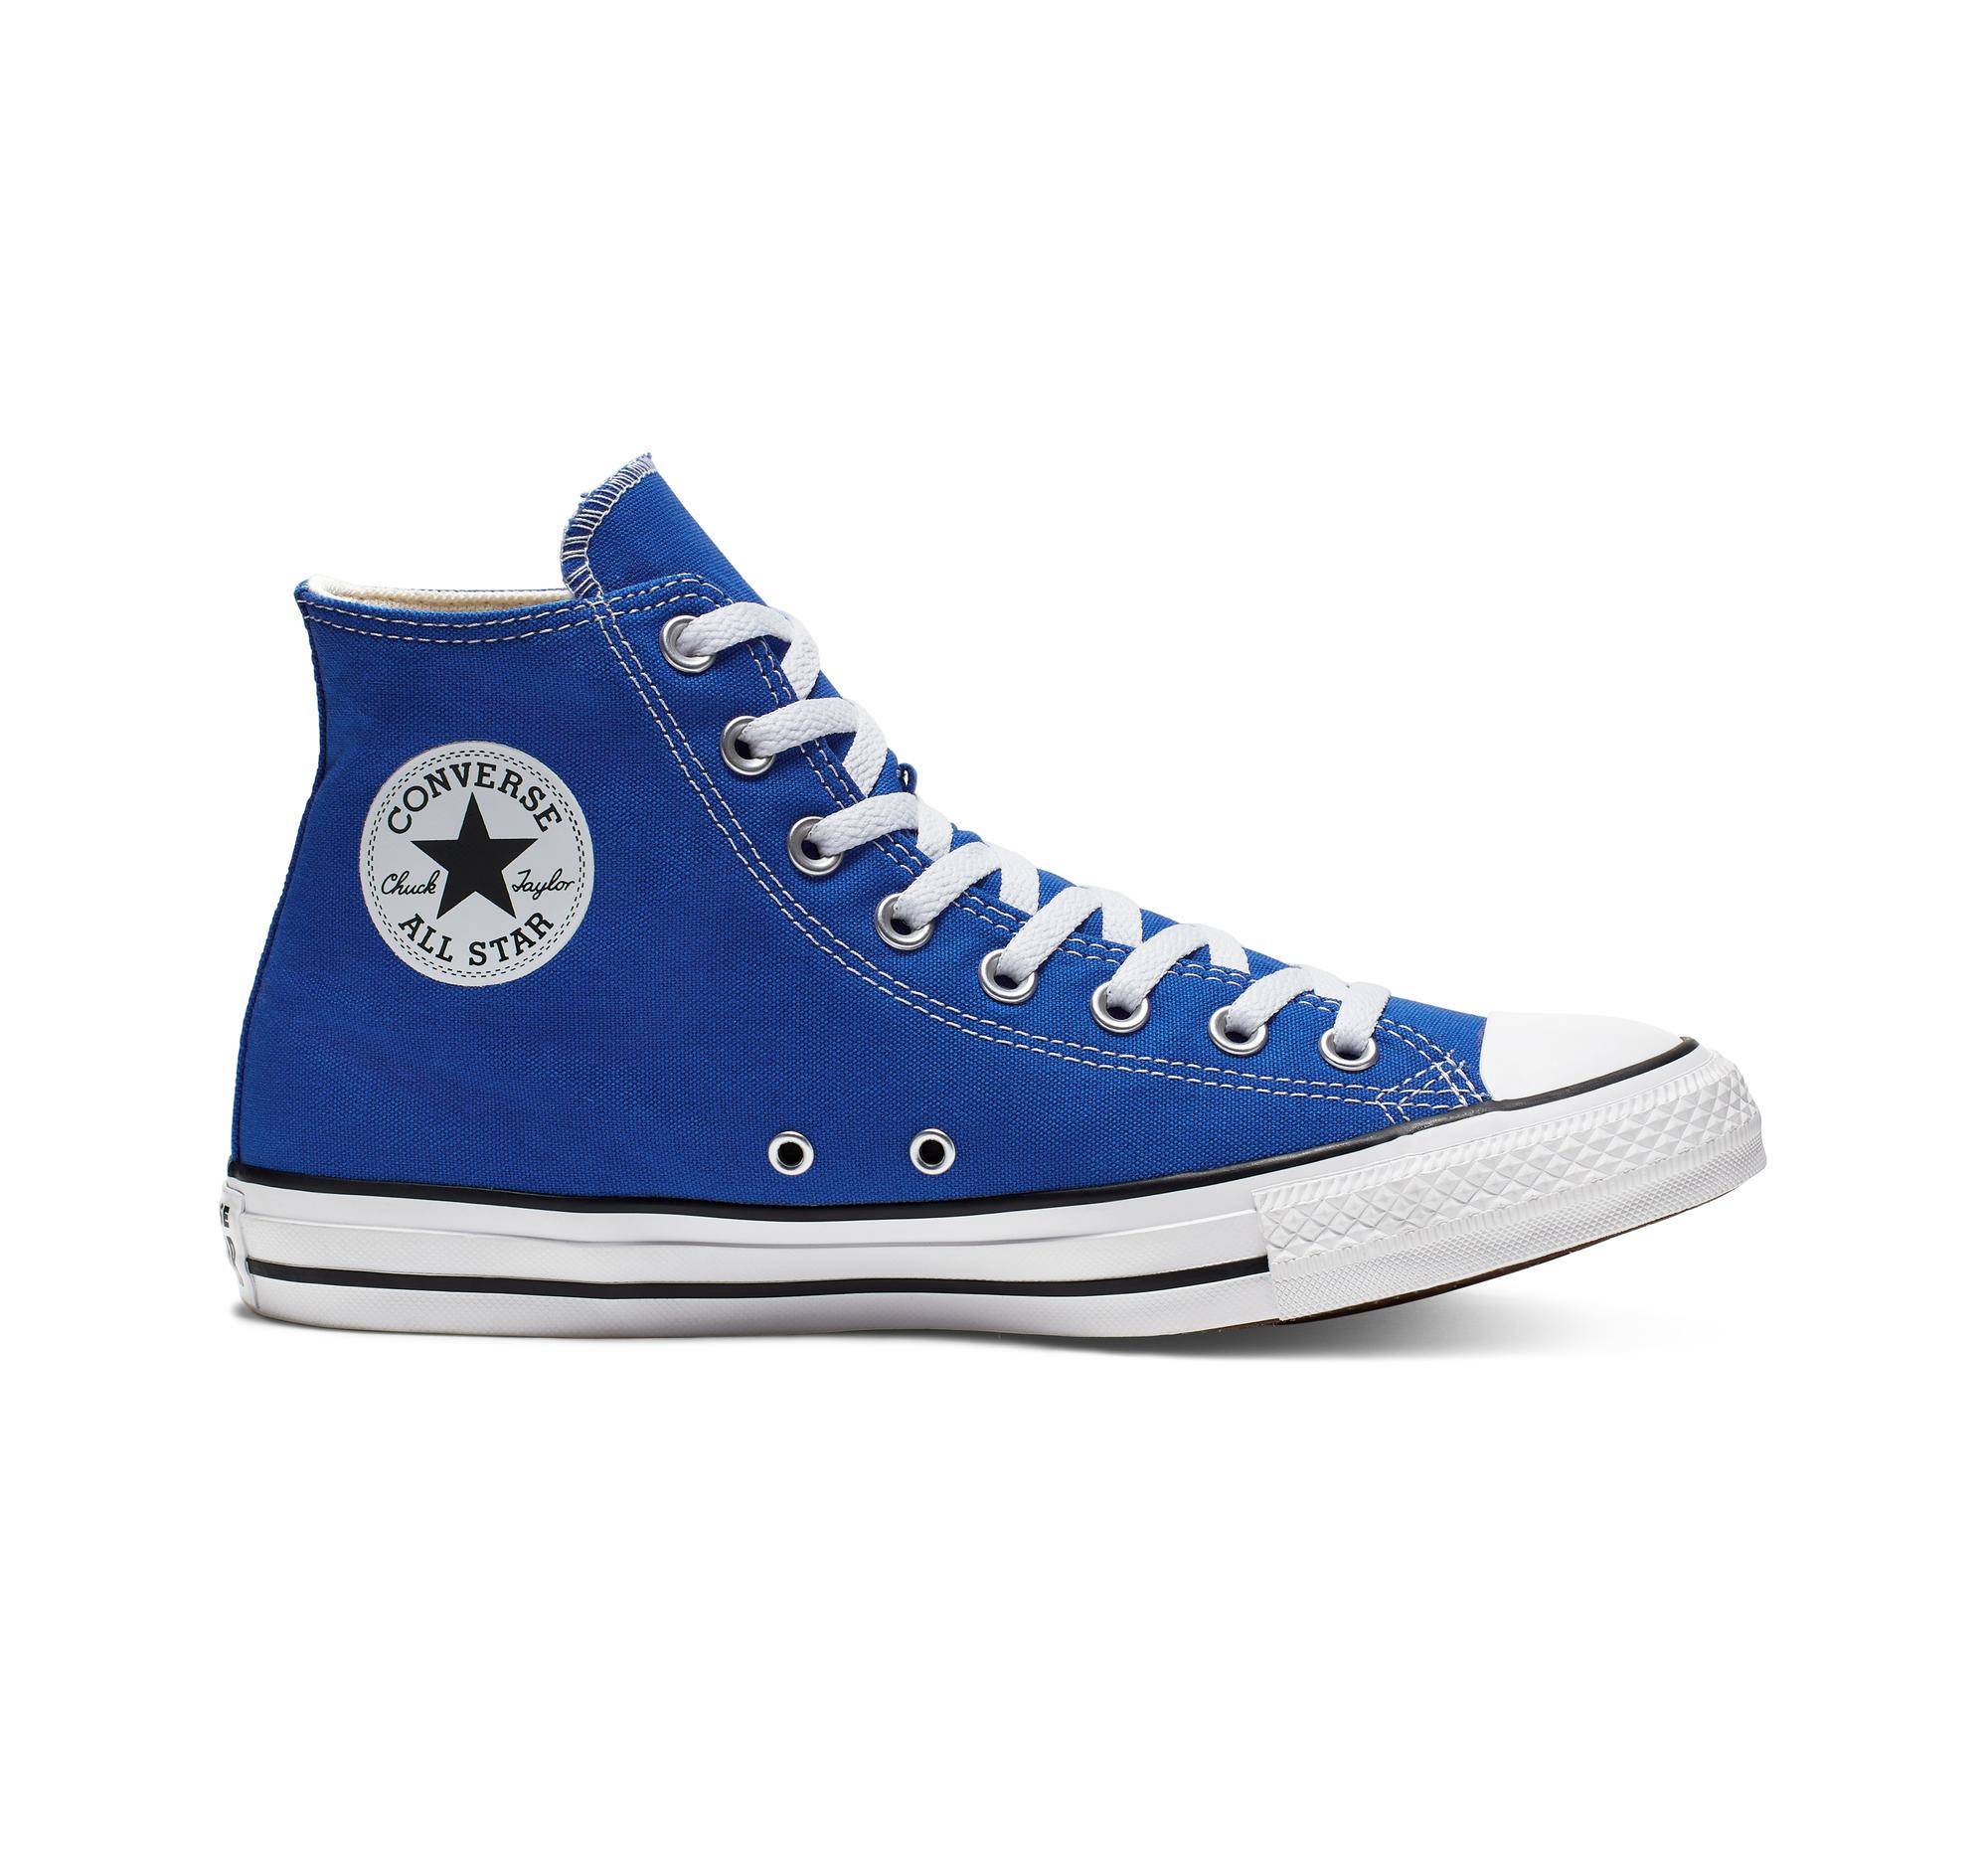 Converse Chuck Taylor All Star Seasonal Color in Blue for Men - Lyst